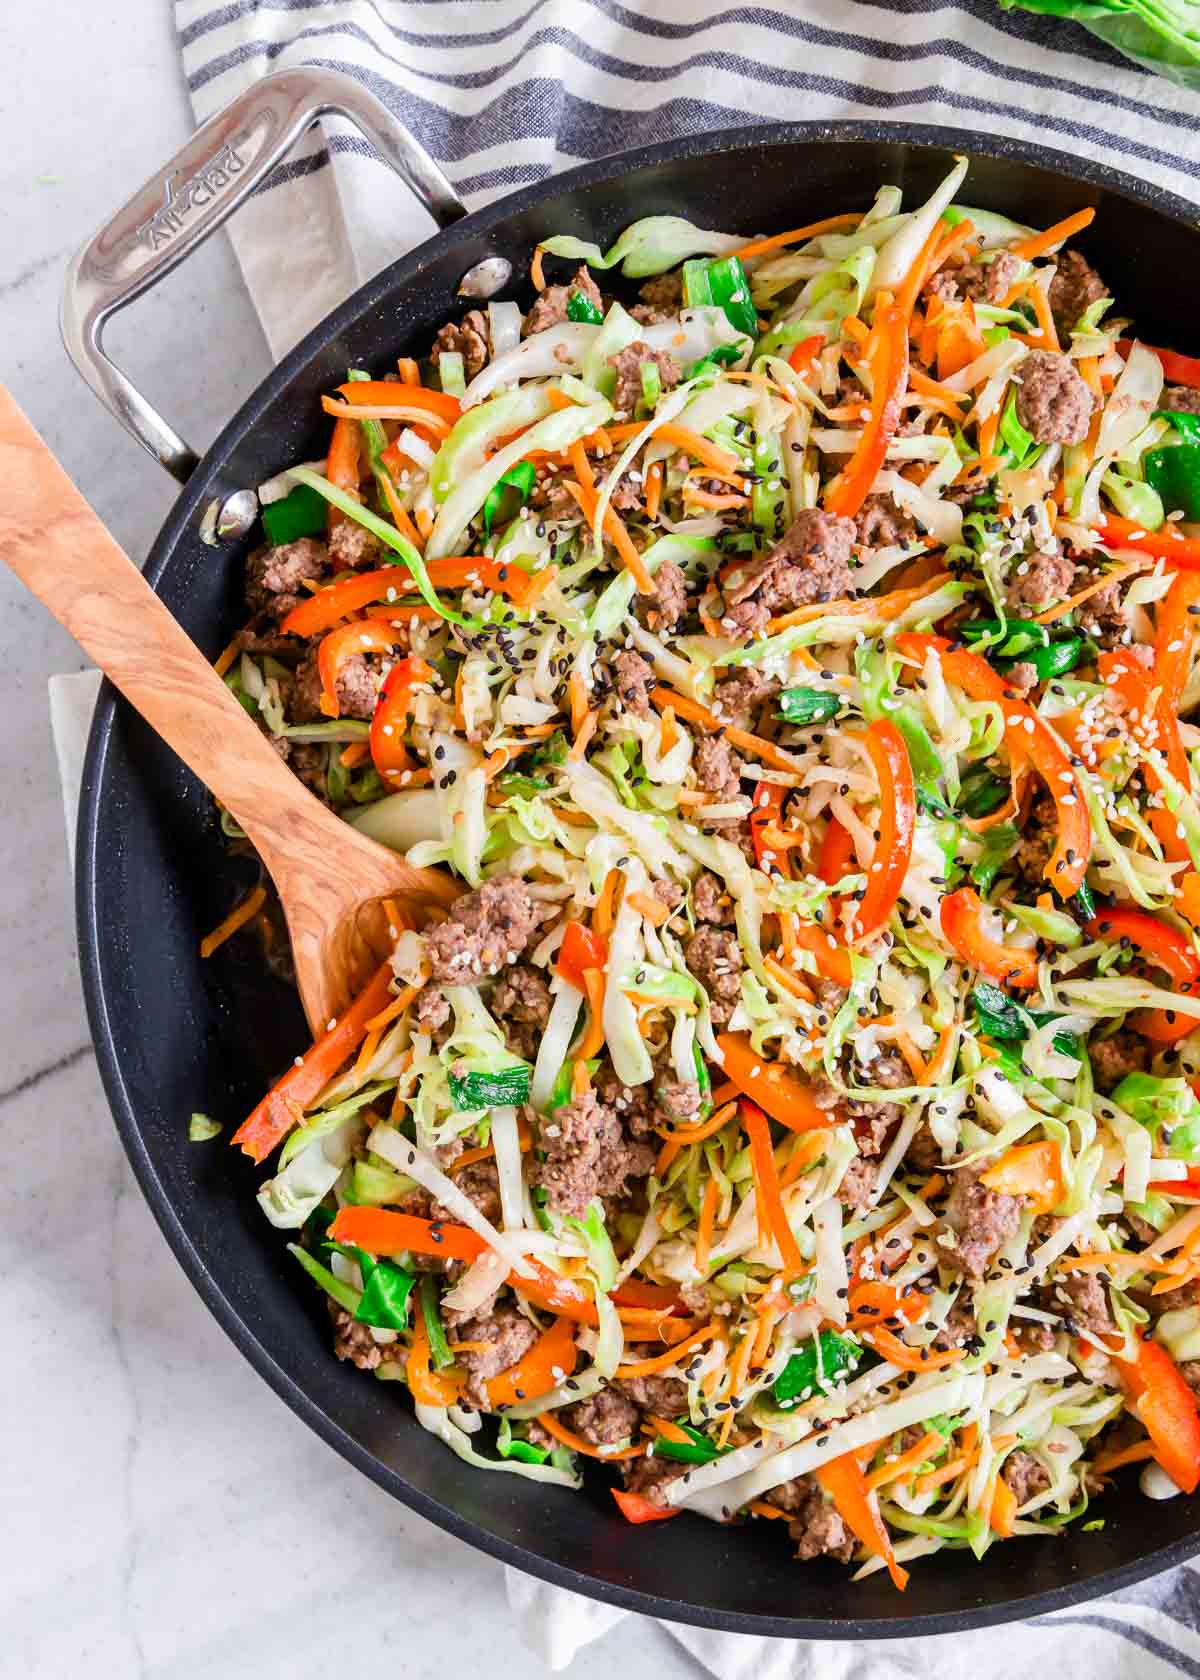 Ground beef cabbage skillet in a pan with a wooden serving spoon.